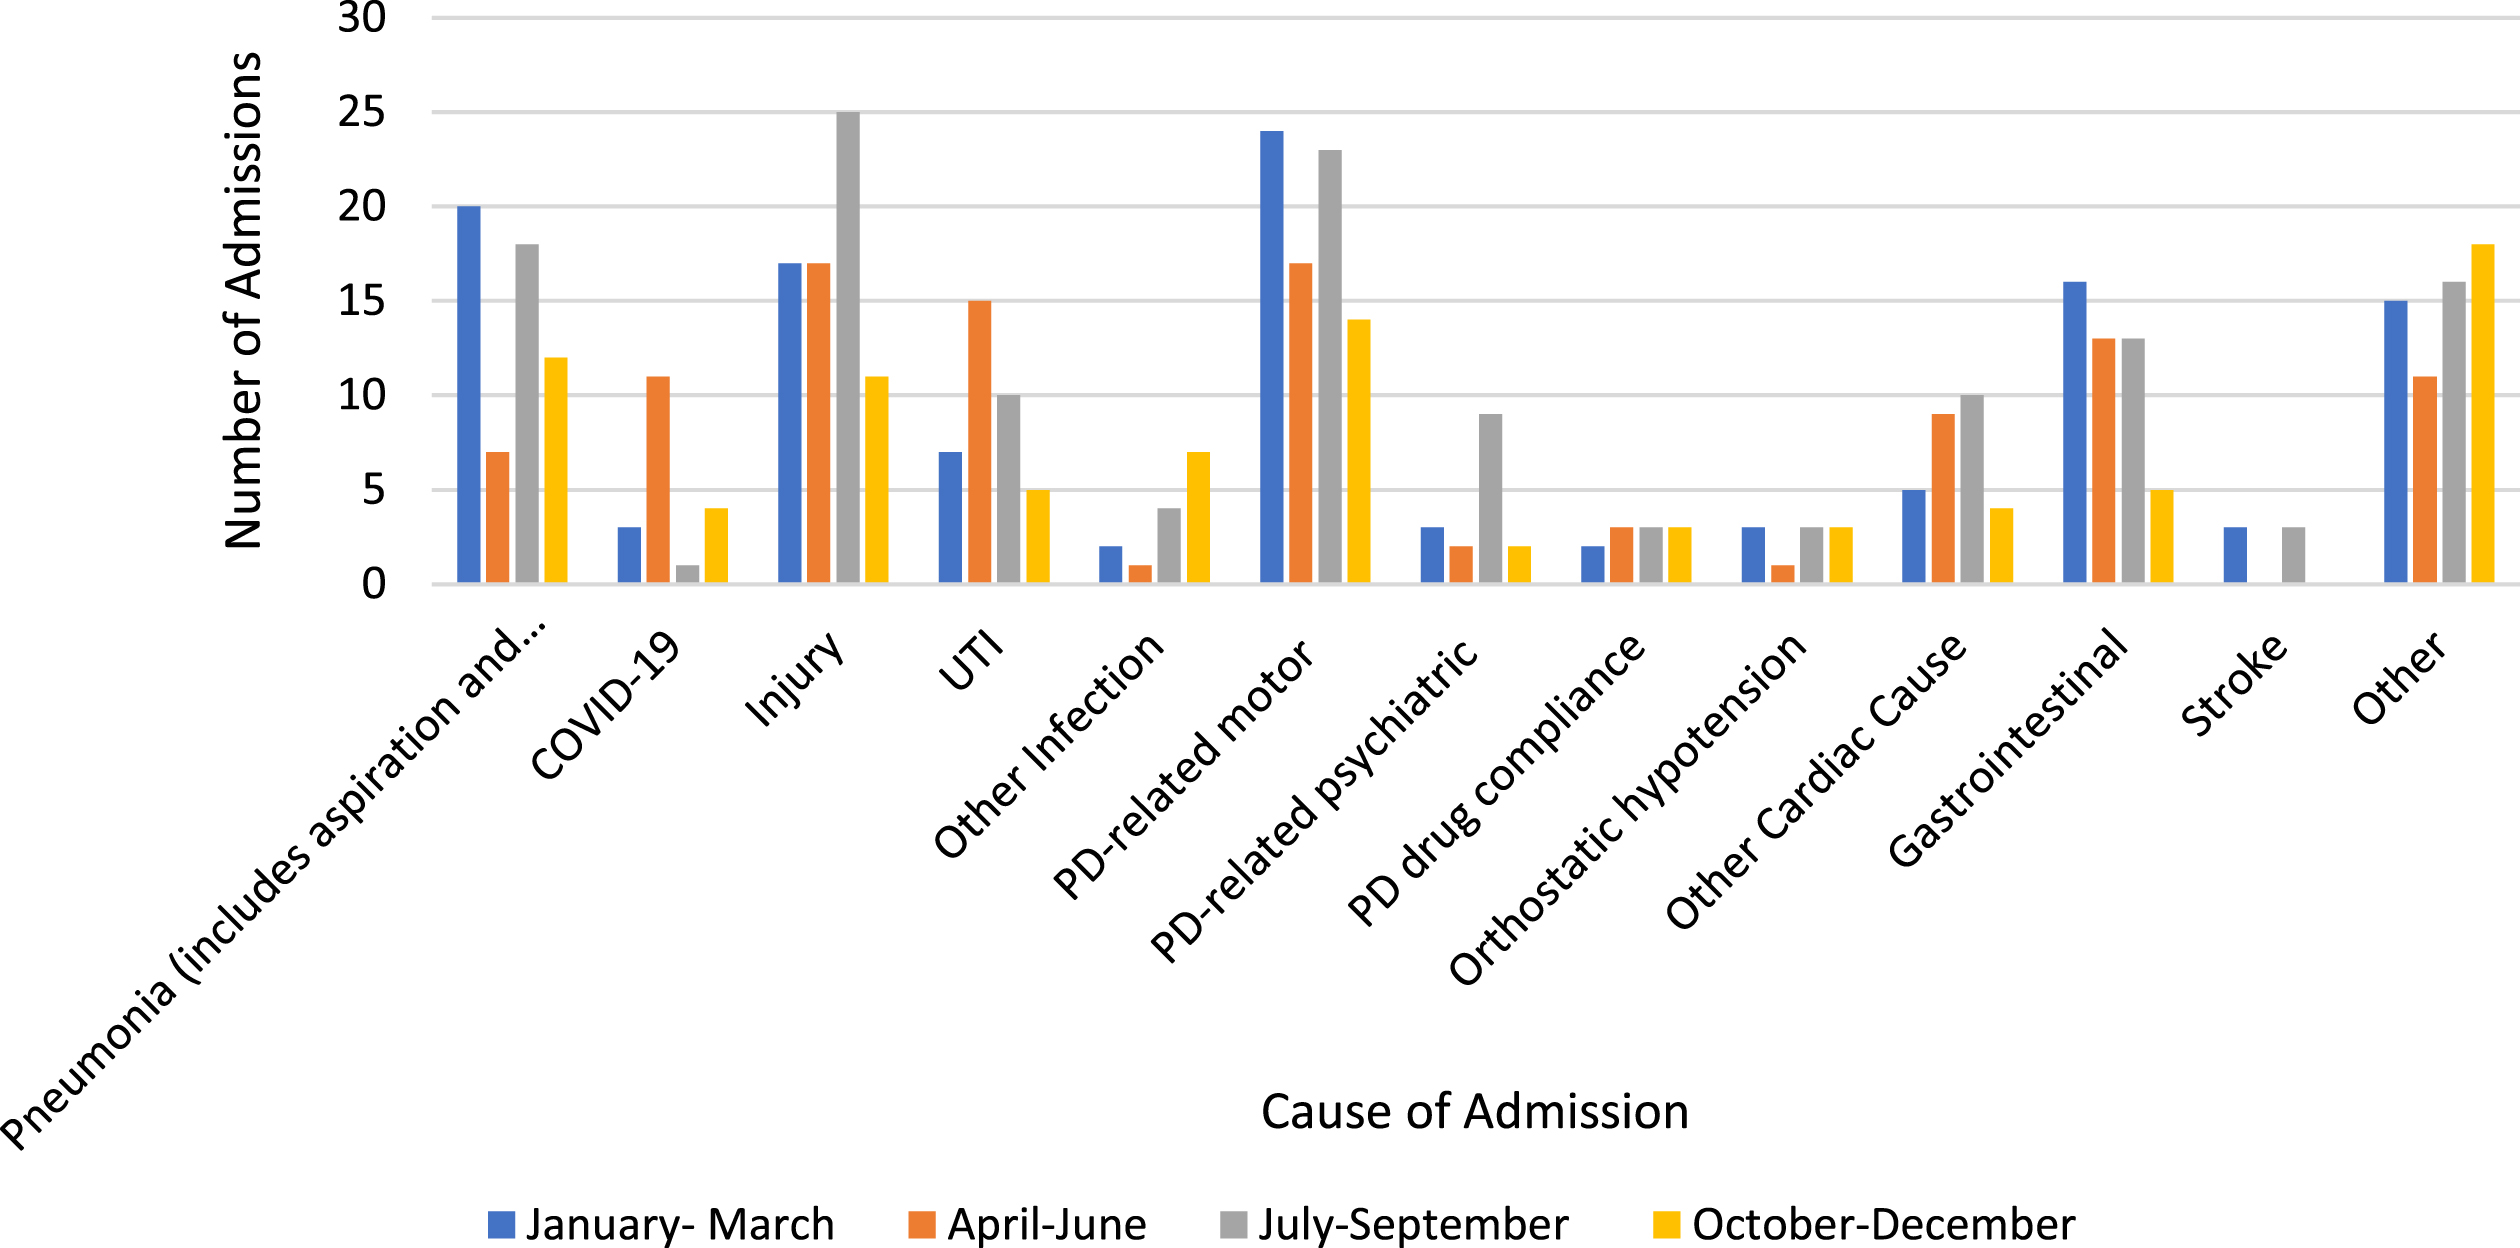 The number of emergency admissions in people with IPD to NHCFT by cause of admission, per quarter in 2020.